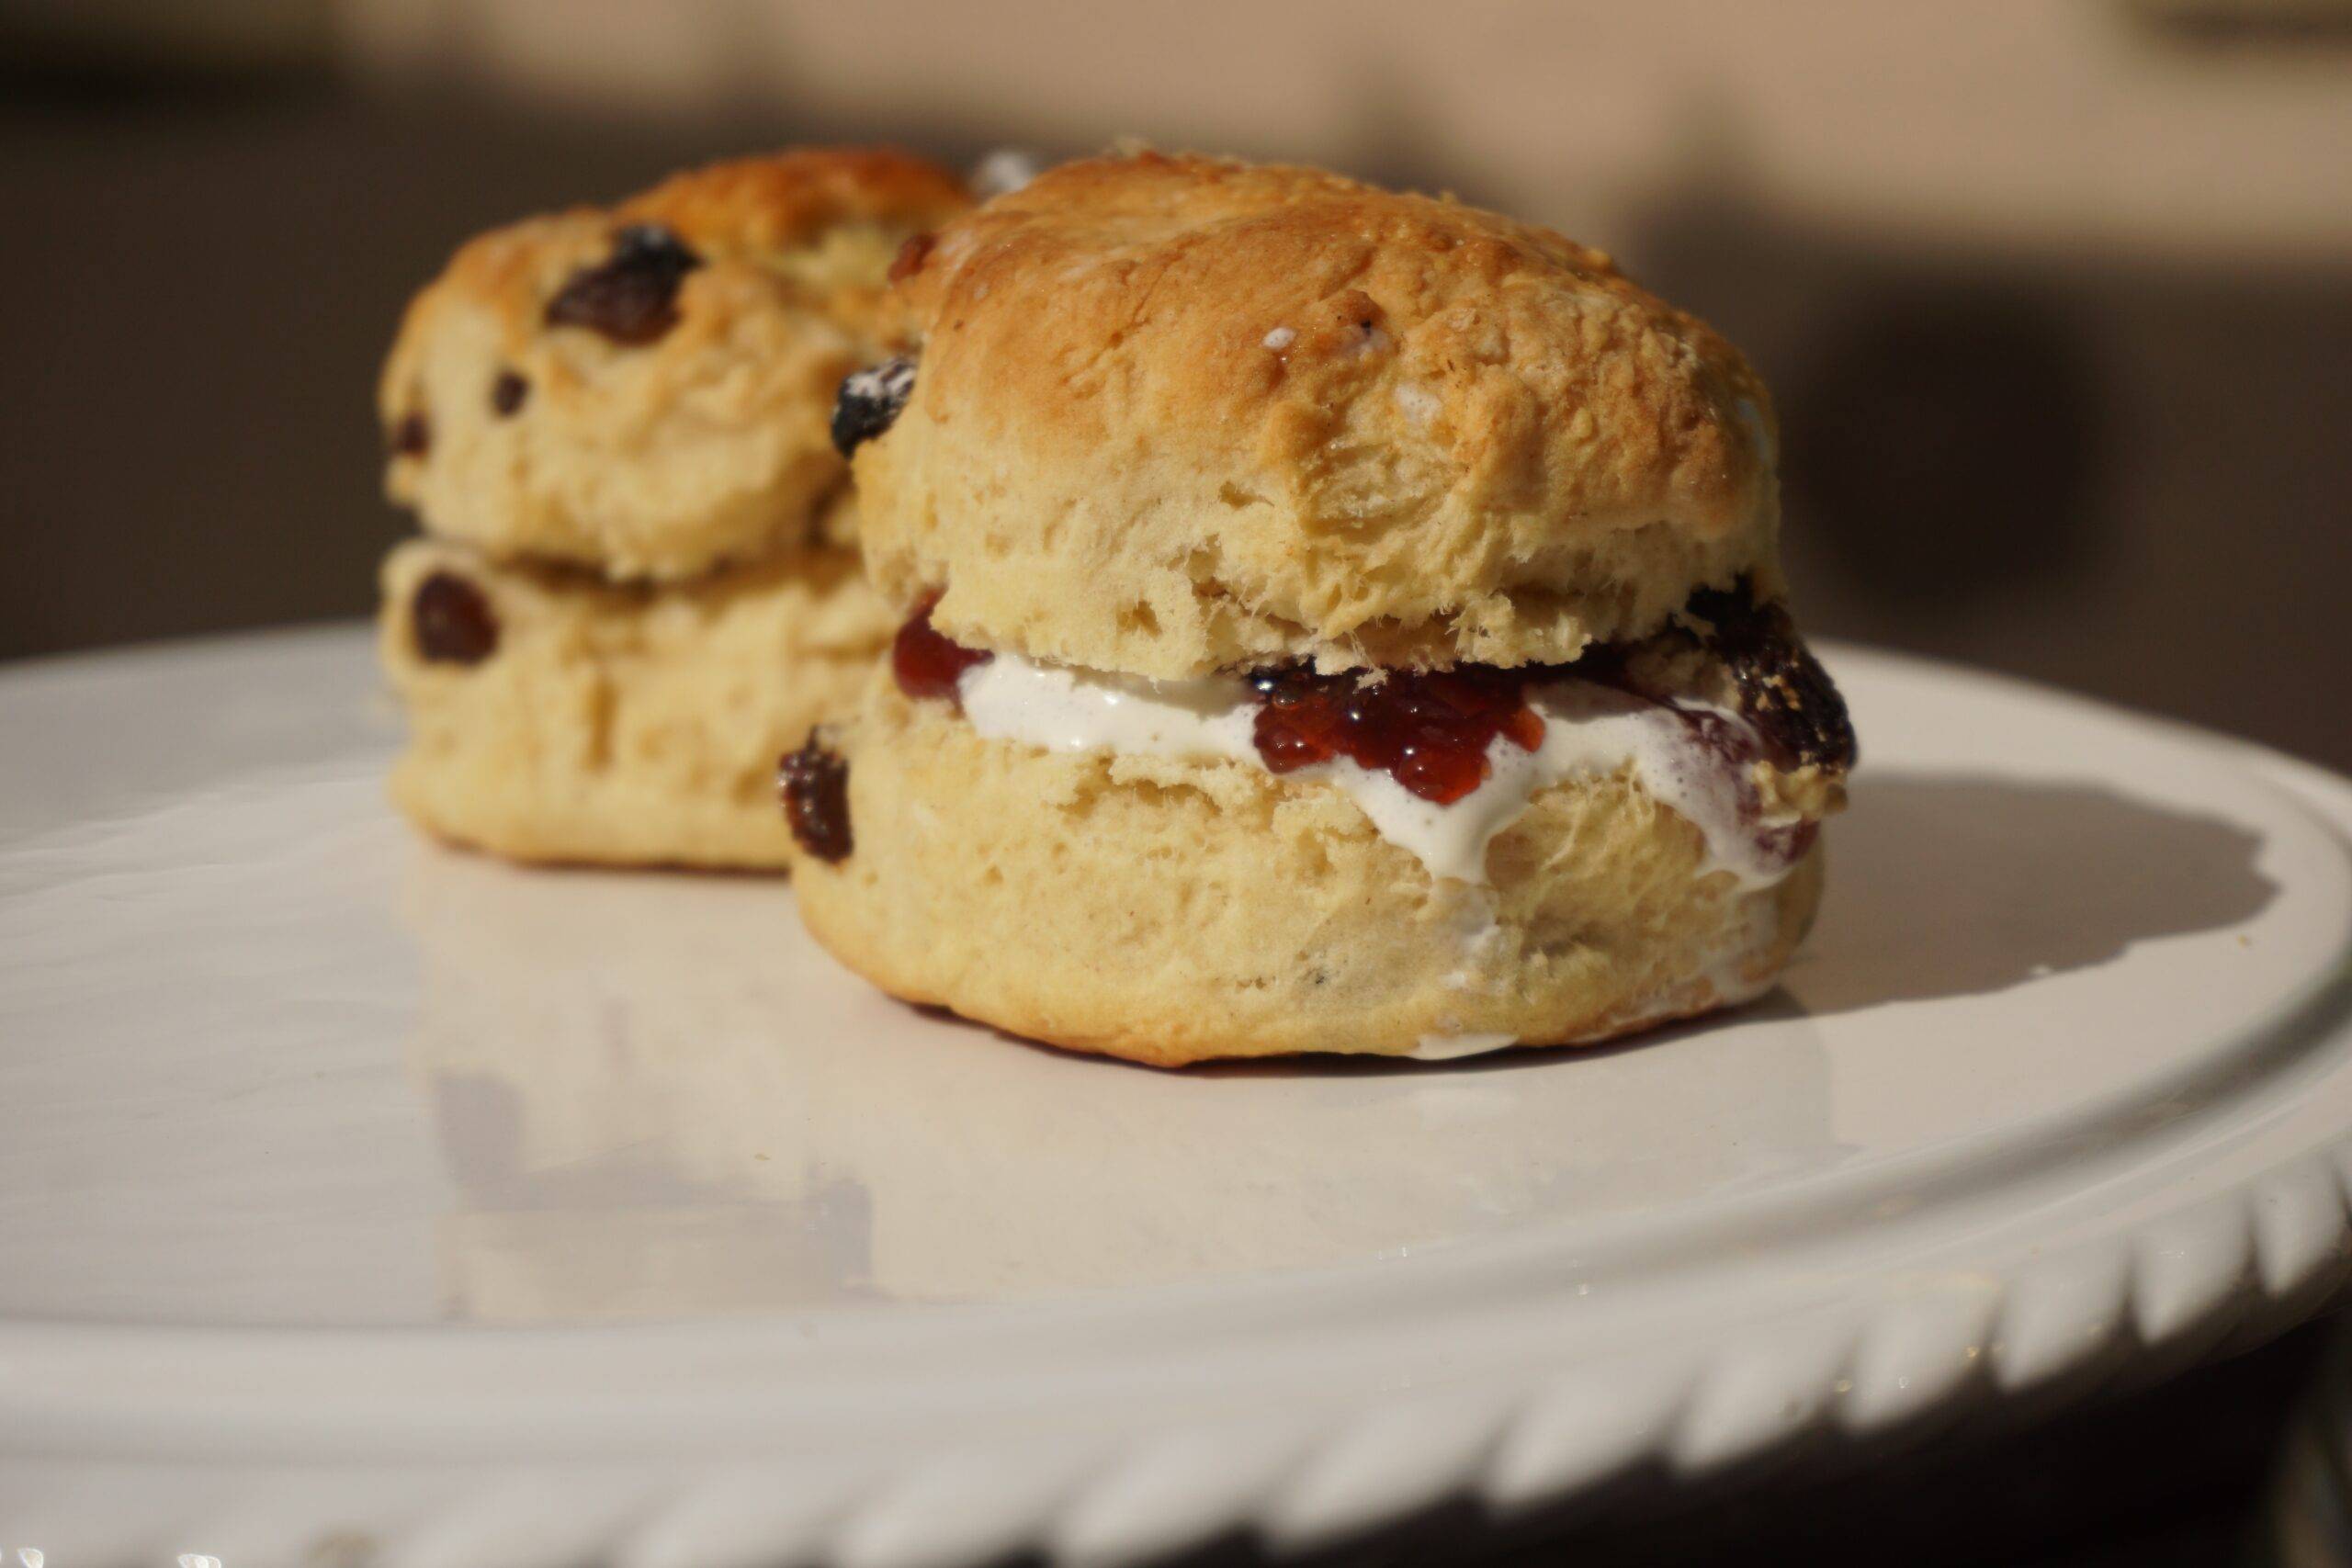 Why Isn't Baking Scones as Easy as Pie? A Step-by-Step Guide